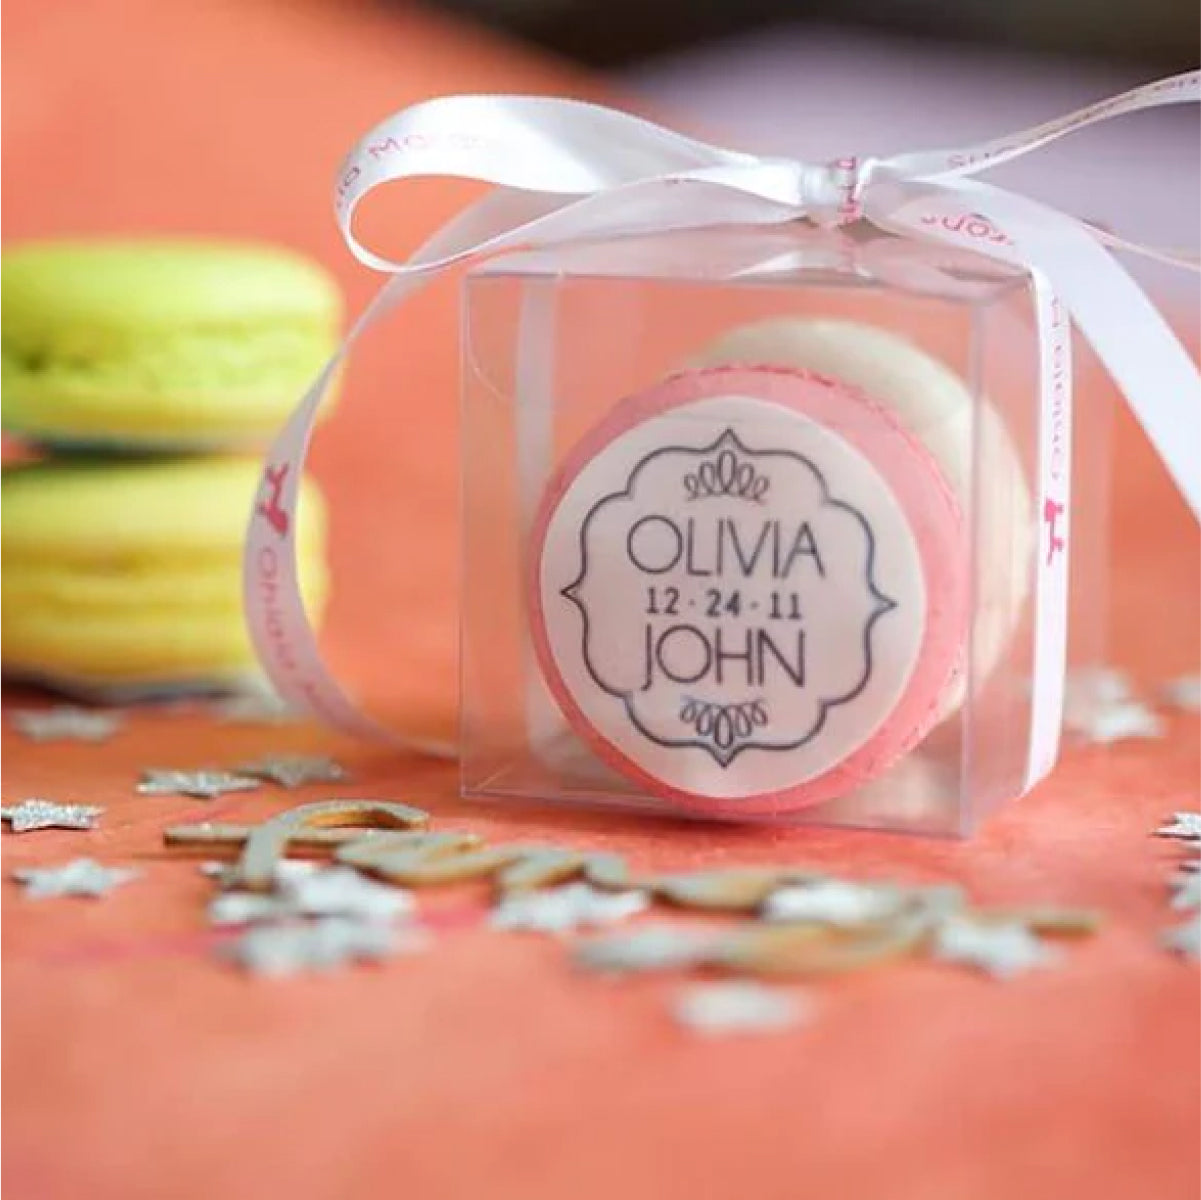 A pink wedding macaron displayed in a clear box that reads "Olivia / 12 - 24 - 11 / John"